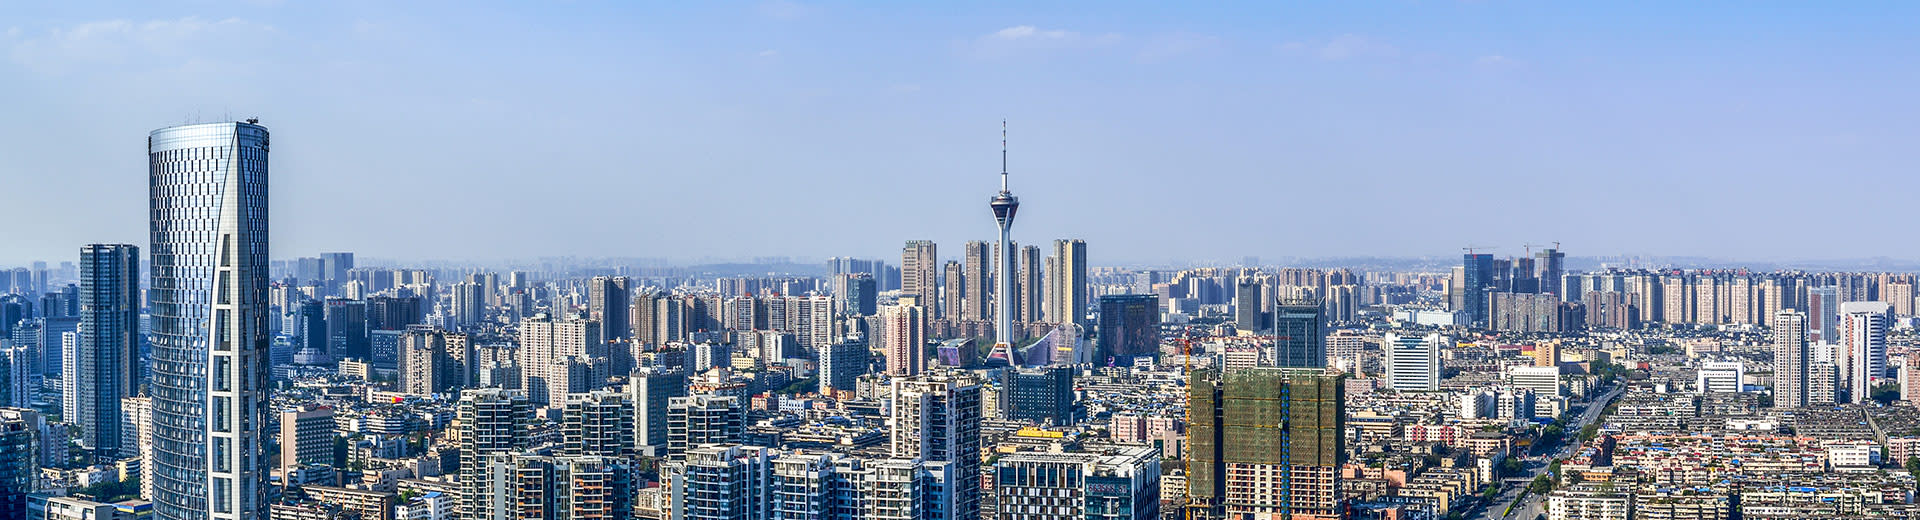 The sprawling cityscape of Chengdu stretches for as far as the eye can see.